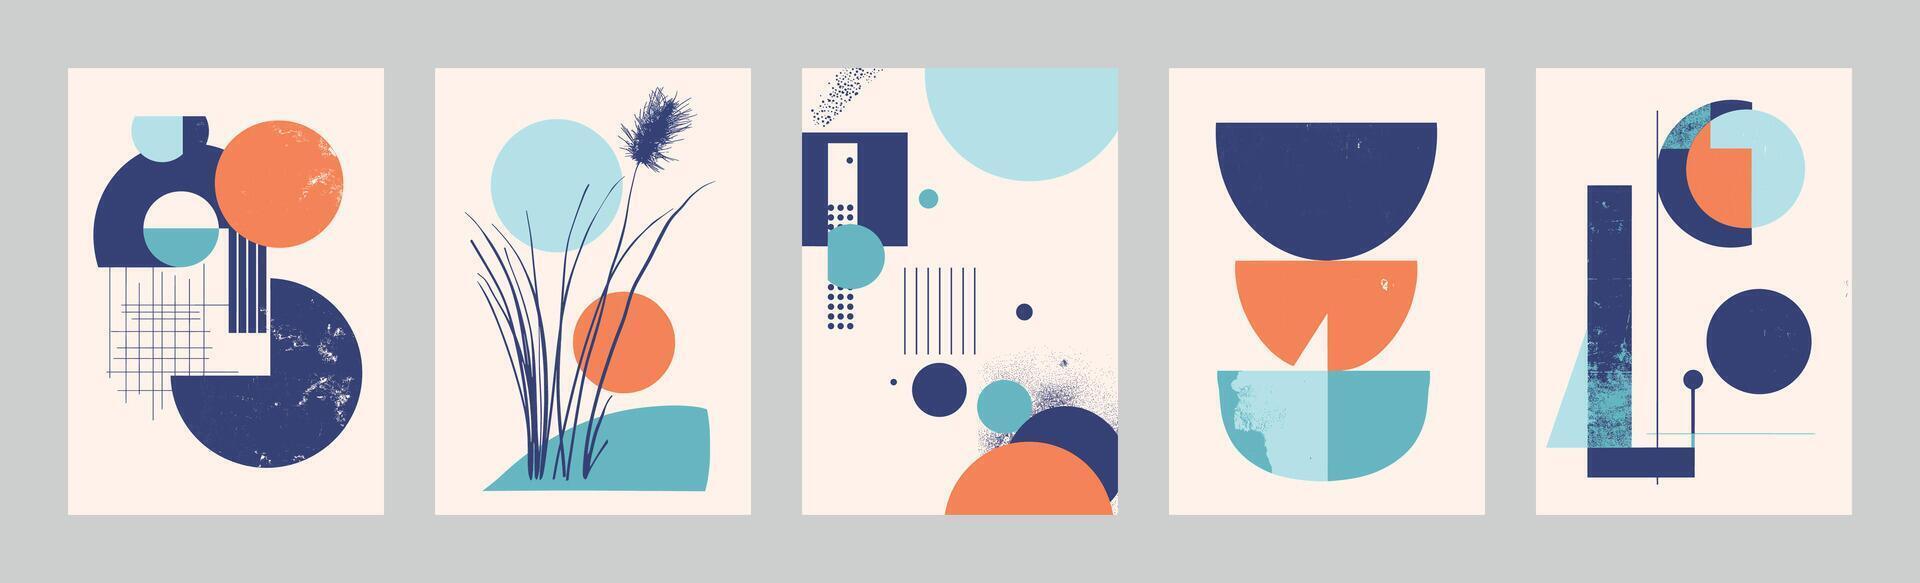 Bauhaus posters, artworks inspired by Postmodern, abstract dynamic symbols, bold geometric shapes, useful for web background, poster art design, magazine front page, hi-tech print cover artwork vector